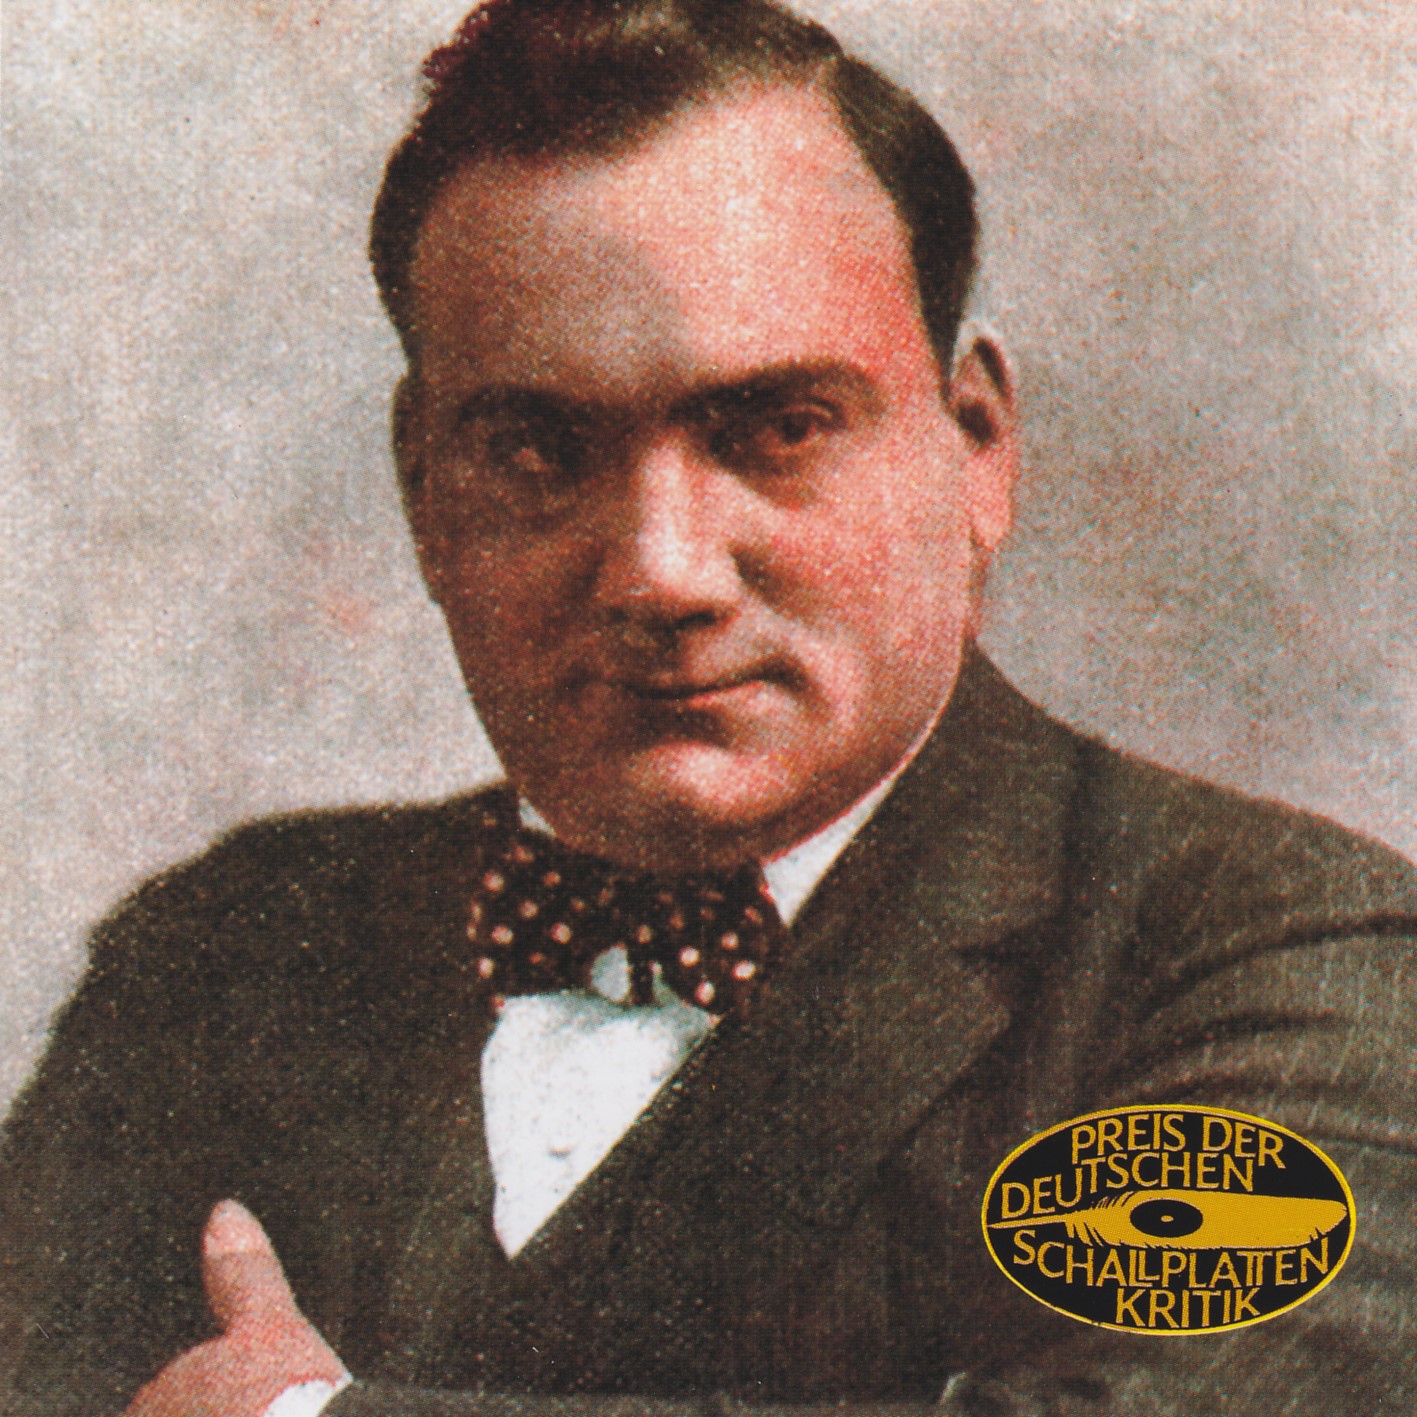 The Best of Enrico Caruso Vol.2